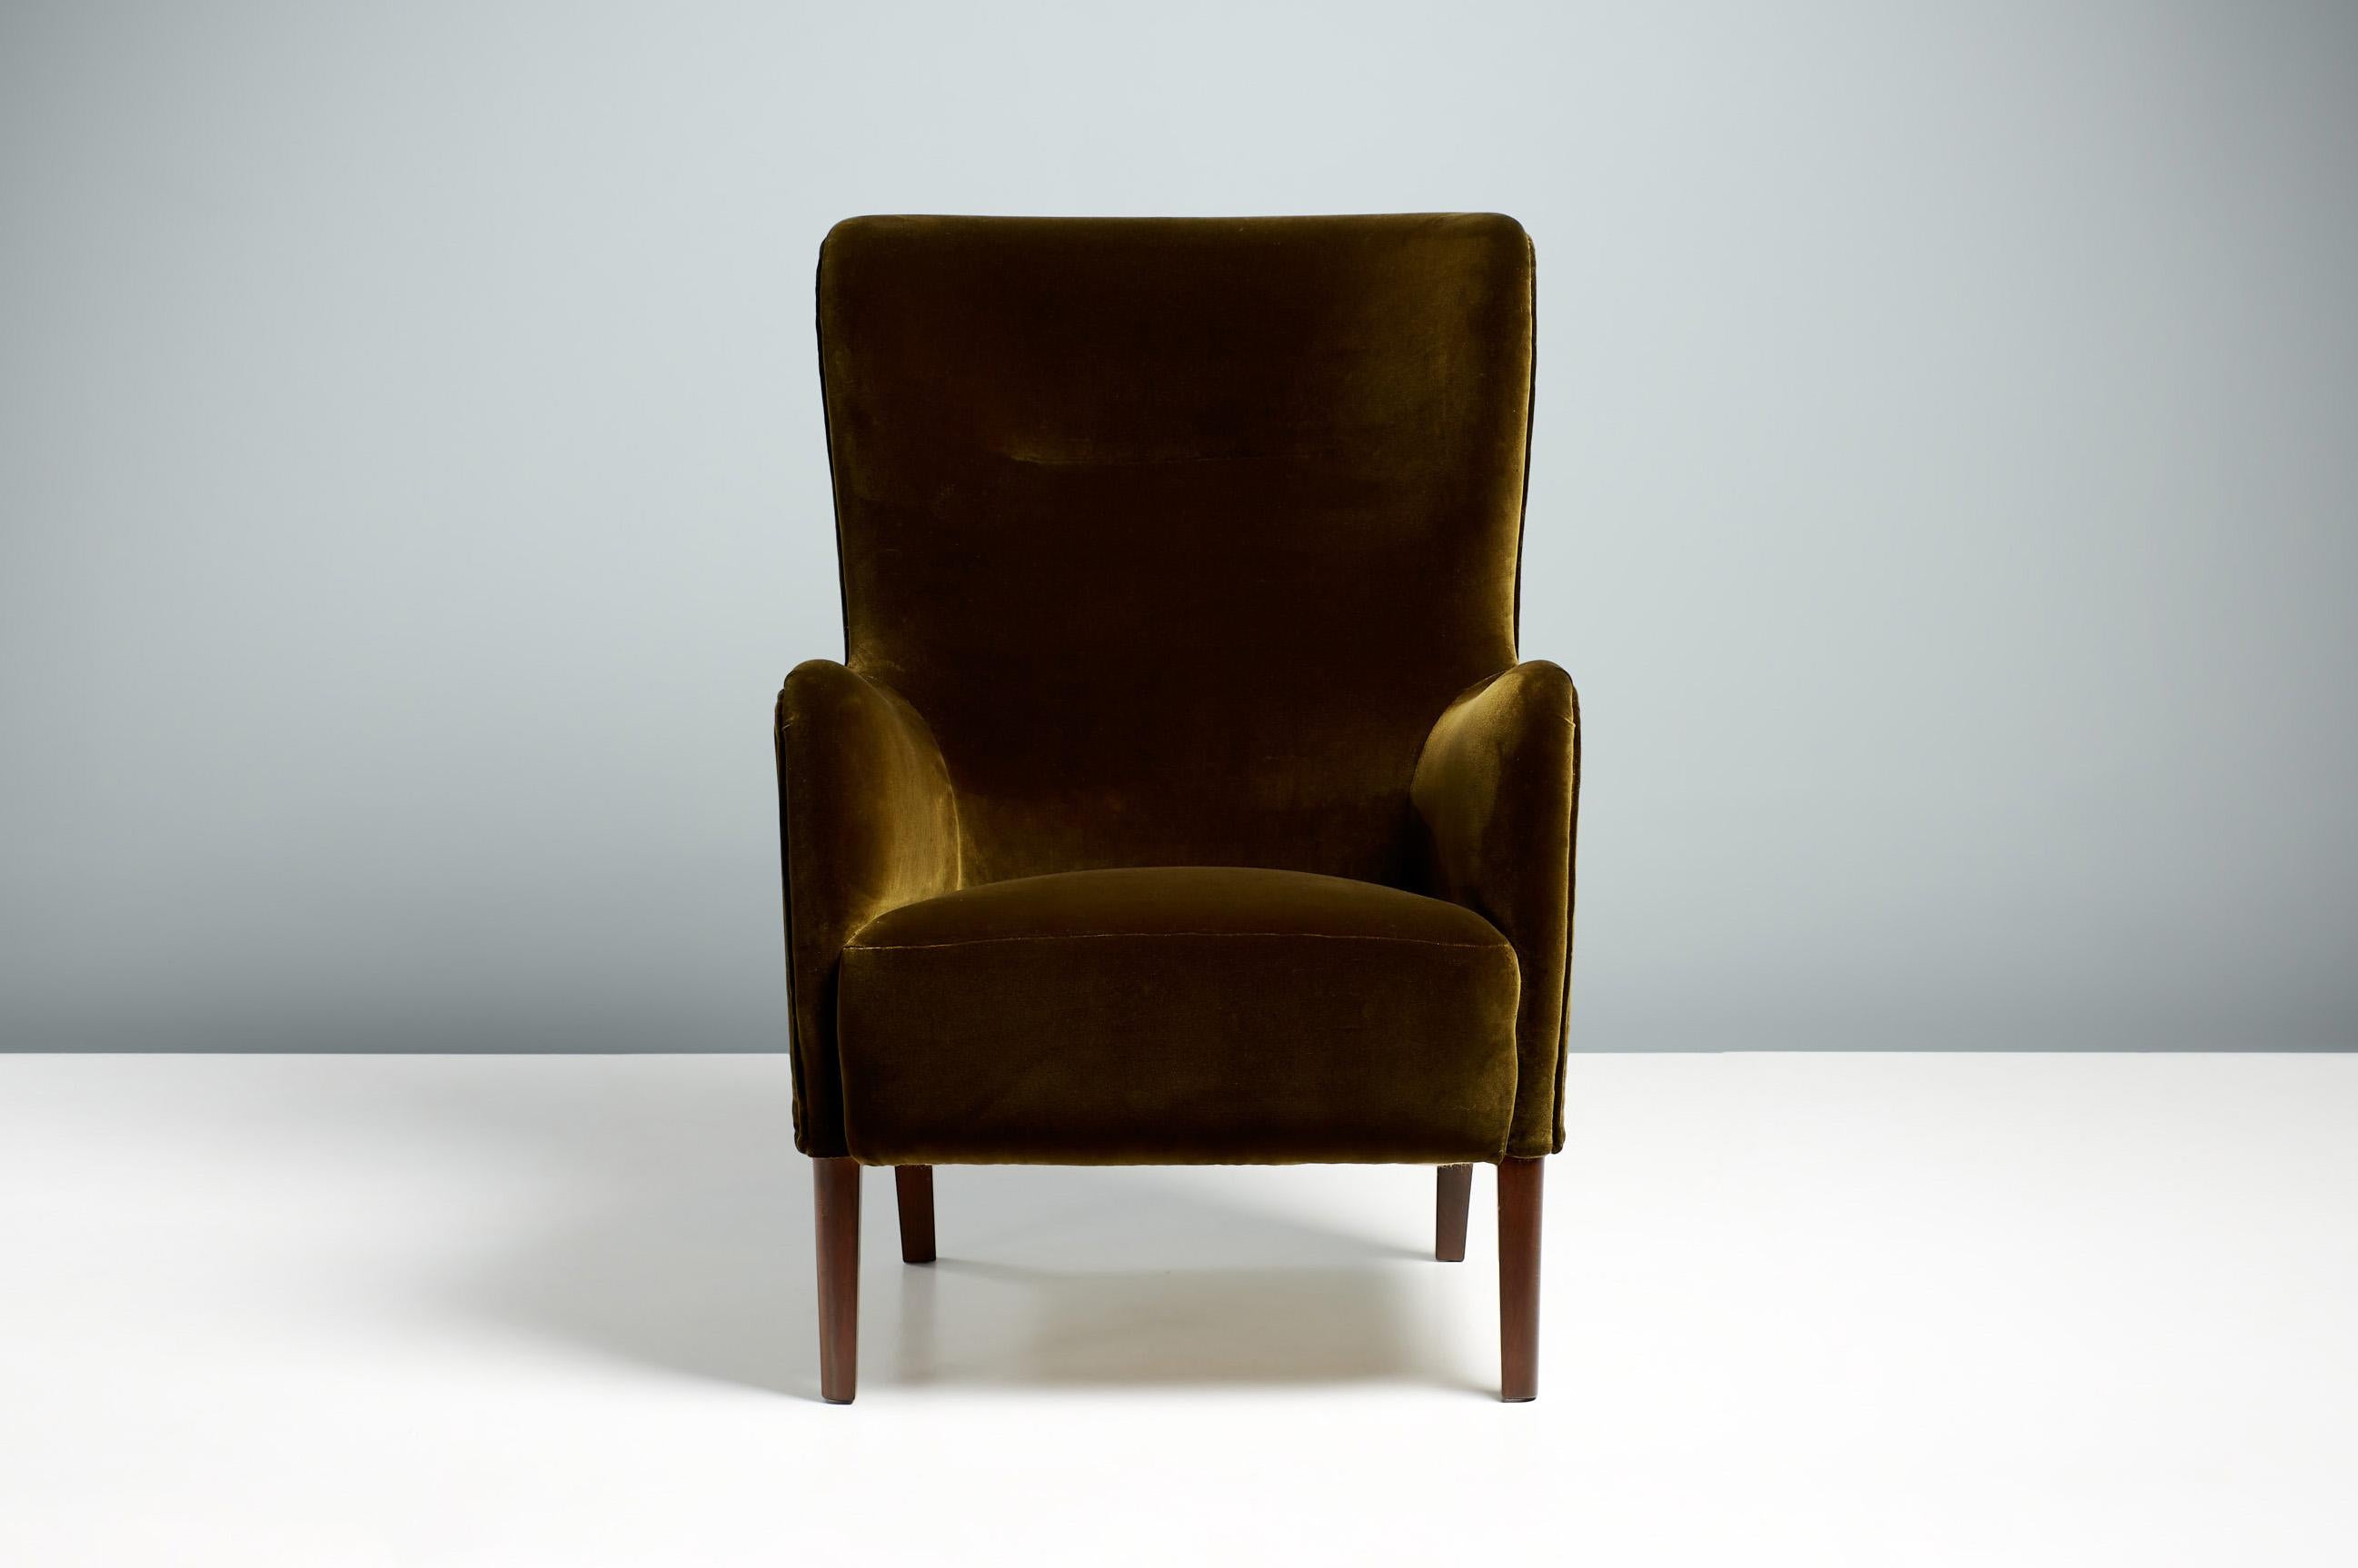 Orla Molgaard-Nielsen Tall Lounge Chair for Fritz Hansen Denmark

Classic yet contemporary looking tall lounge chair produced by Fritz Hansen in Denmark in the early 1940s and designed by Orla Molgaard-Nielsen. The beech legs have been dark stained